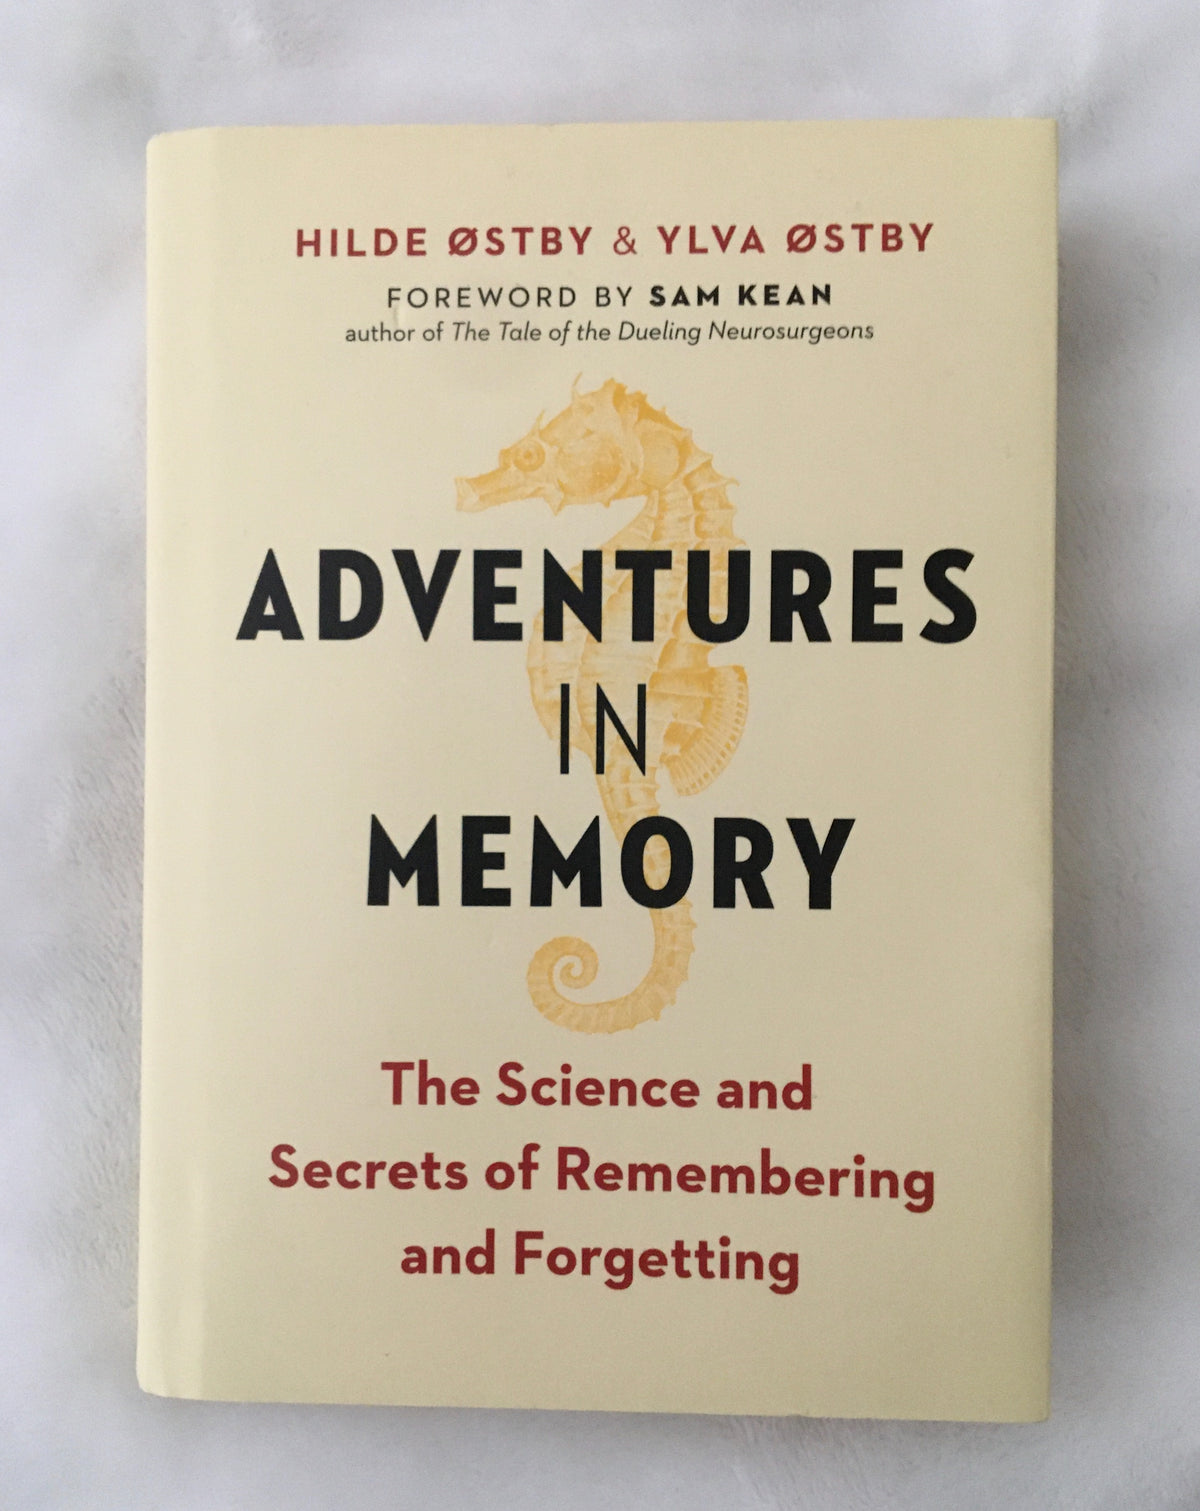 Adventures in Memory by (Hilde Ostby &amp; Yluva Ostby, book, Ten Dollar Books, Ten Dollar Books